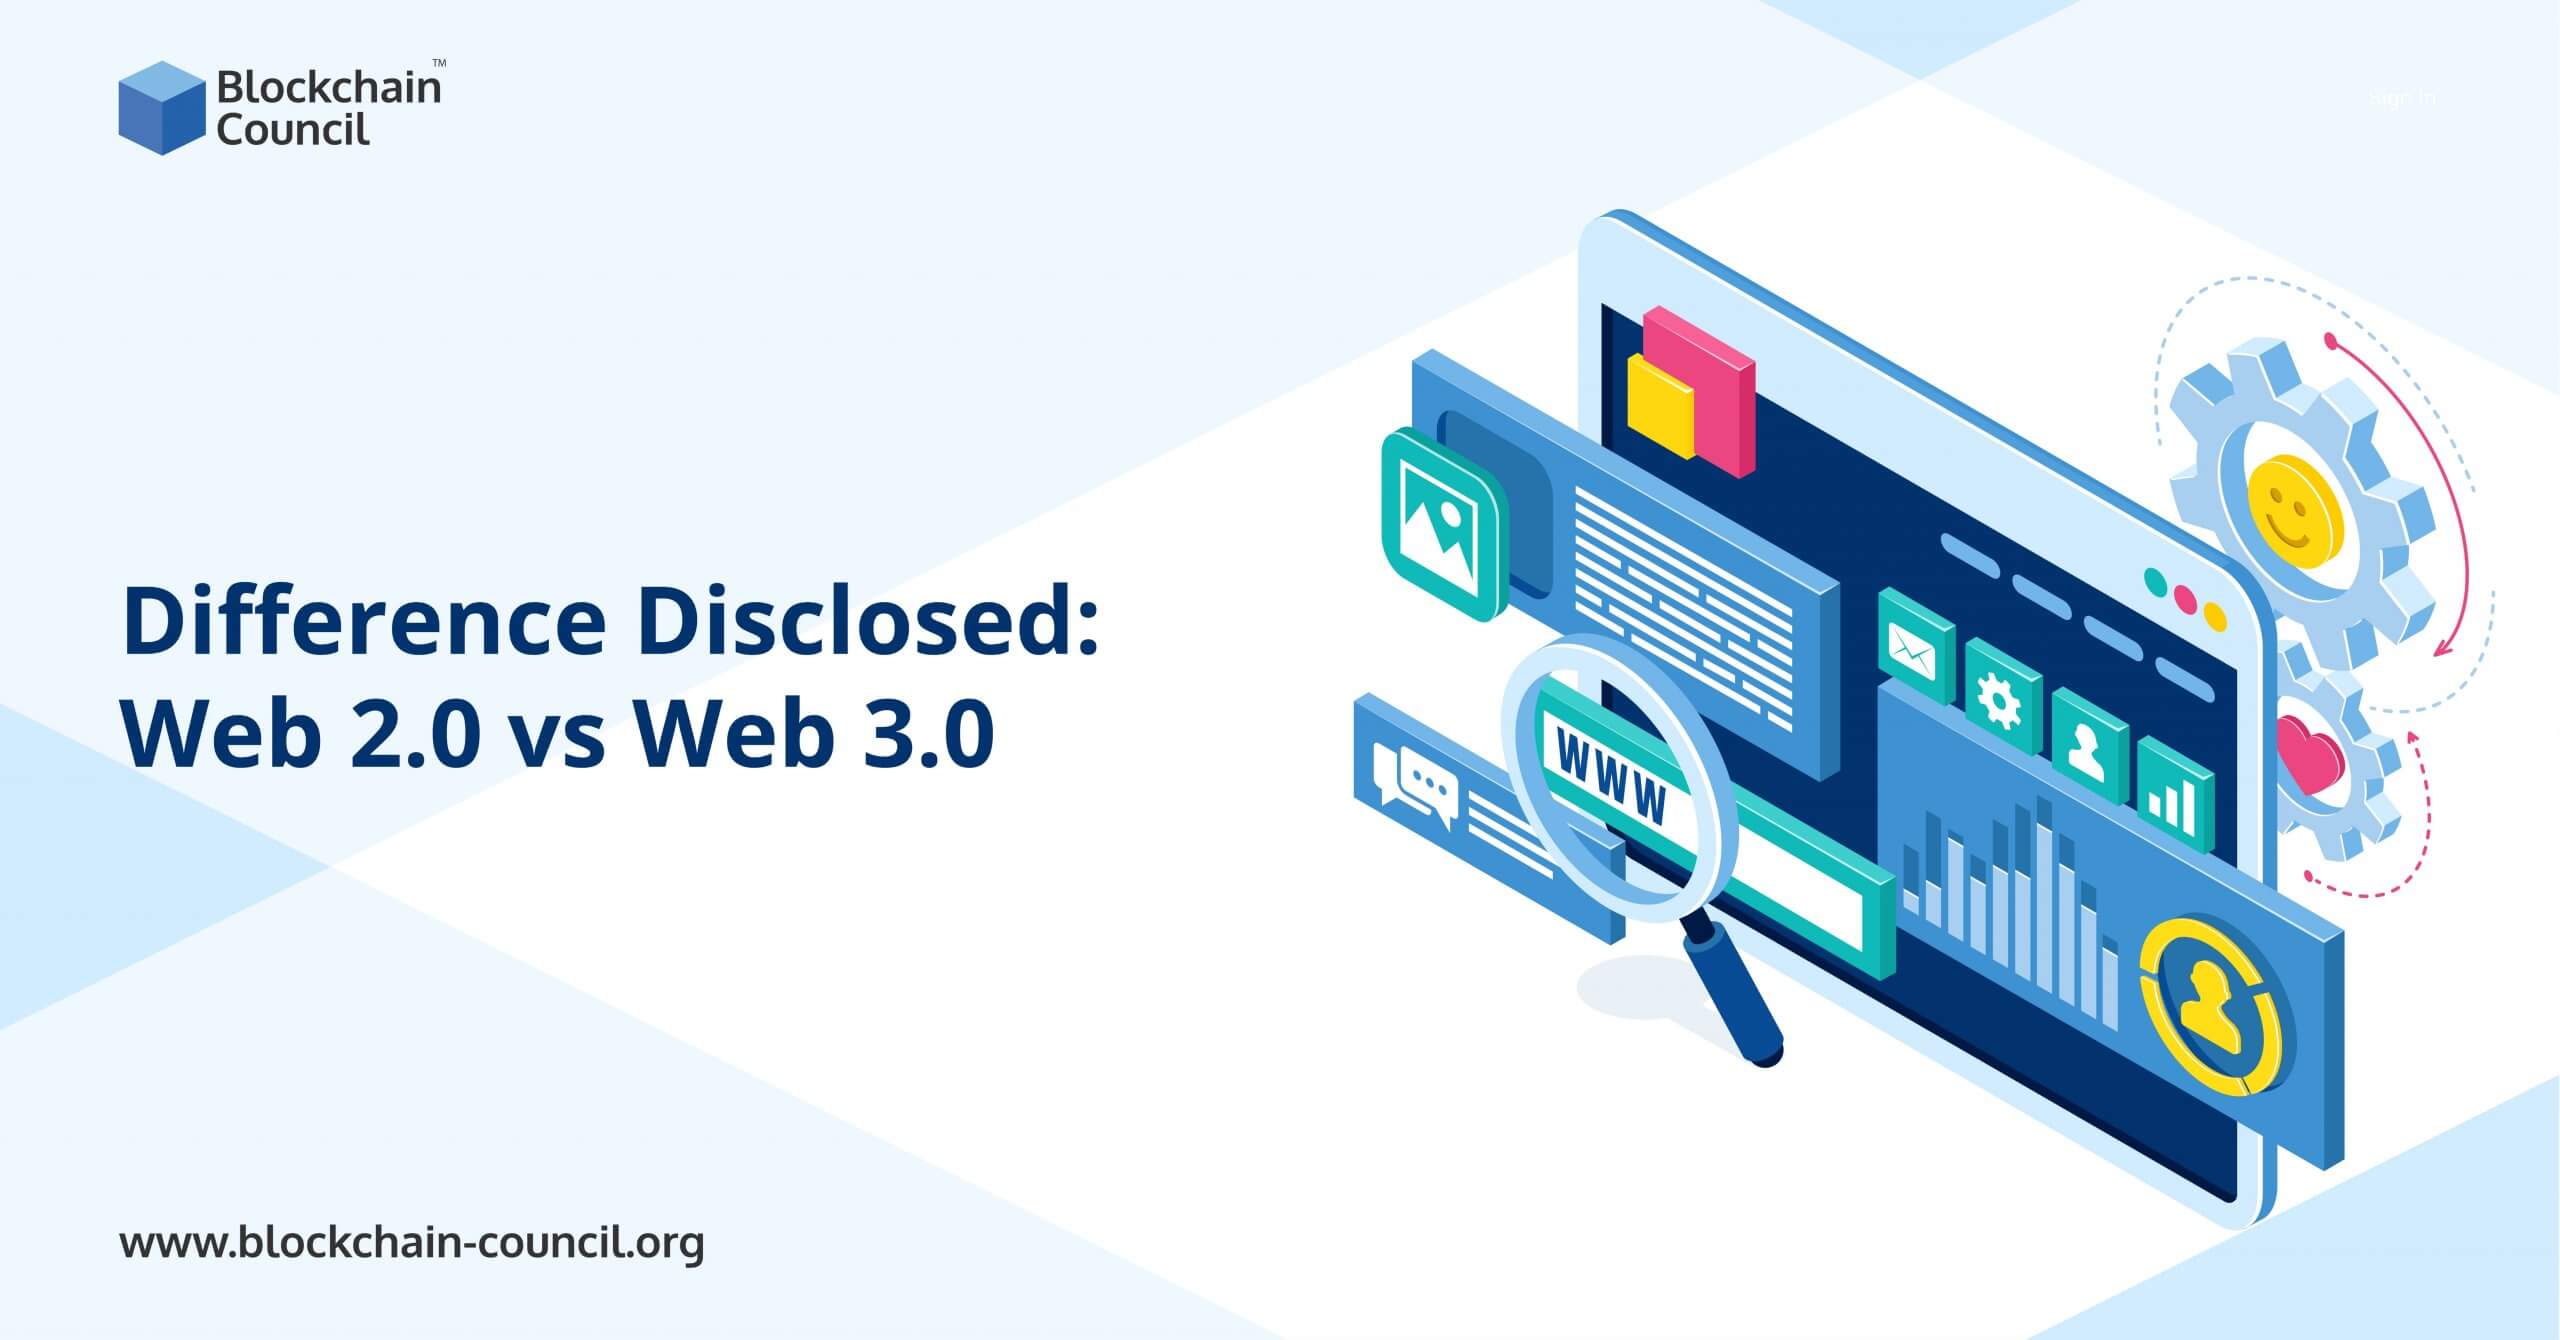 Difference Disclosed: Web 2.0 vs Web 3.0